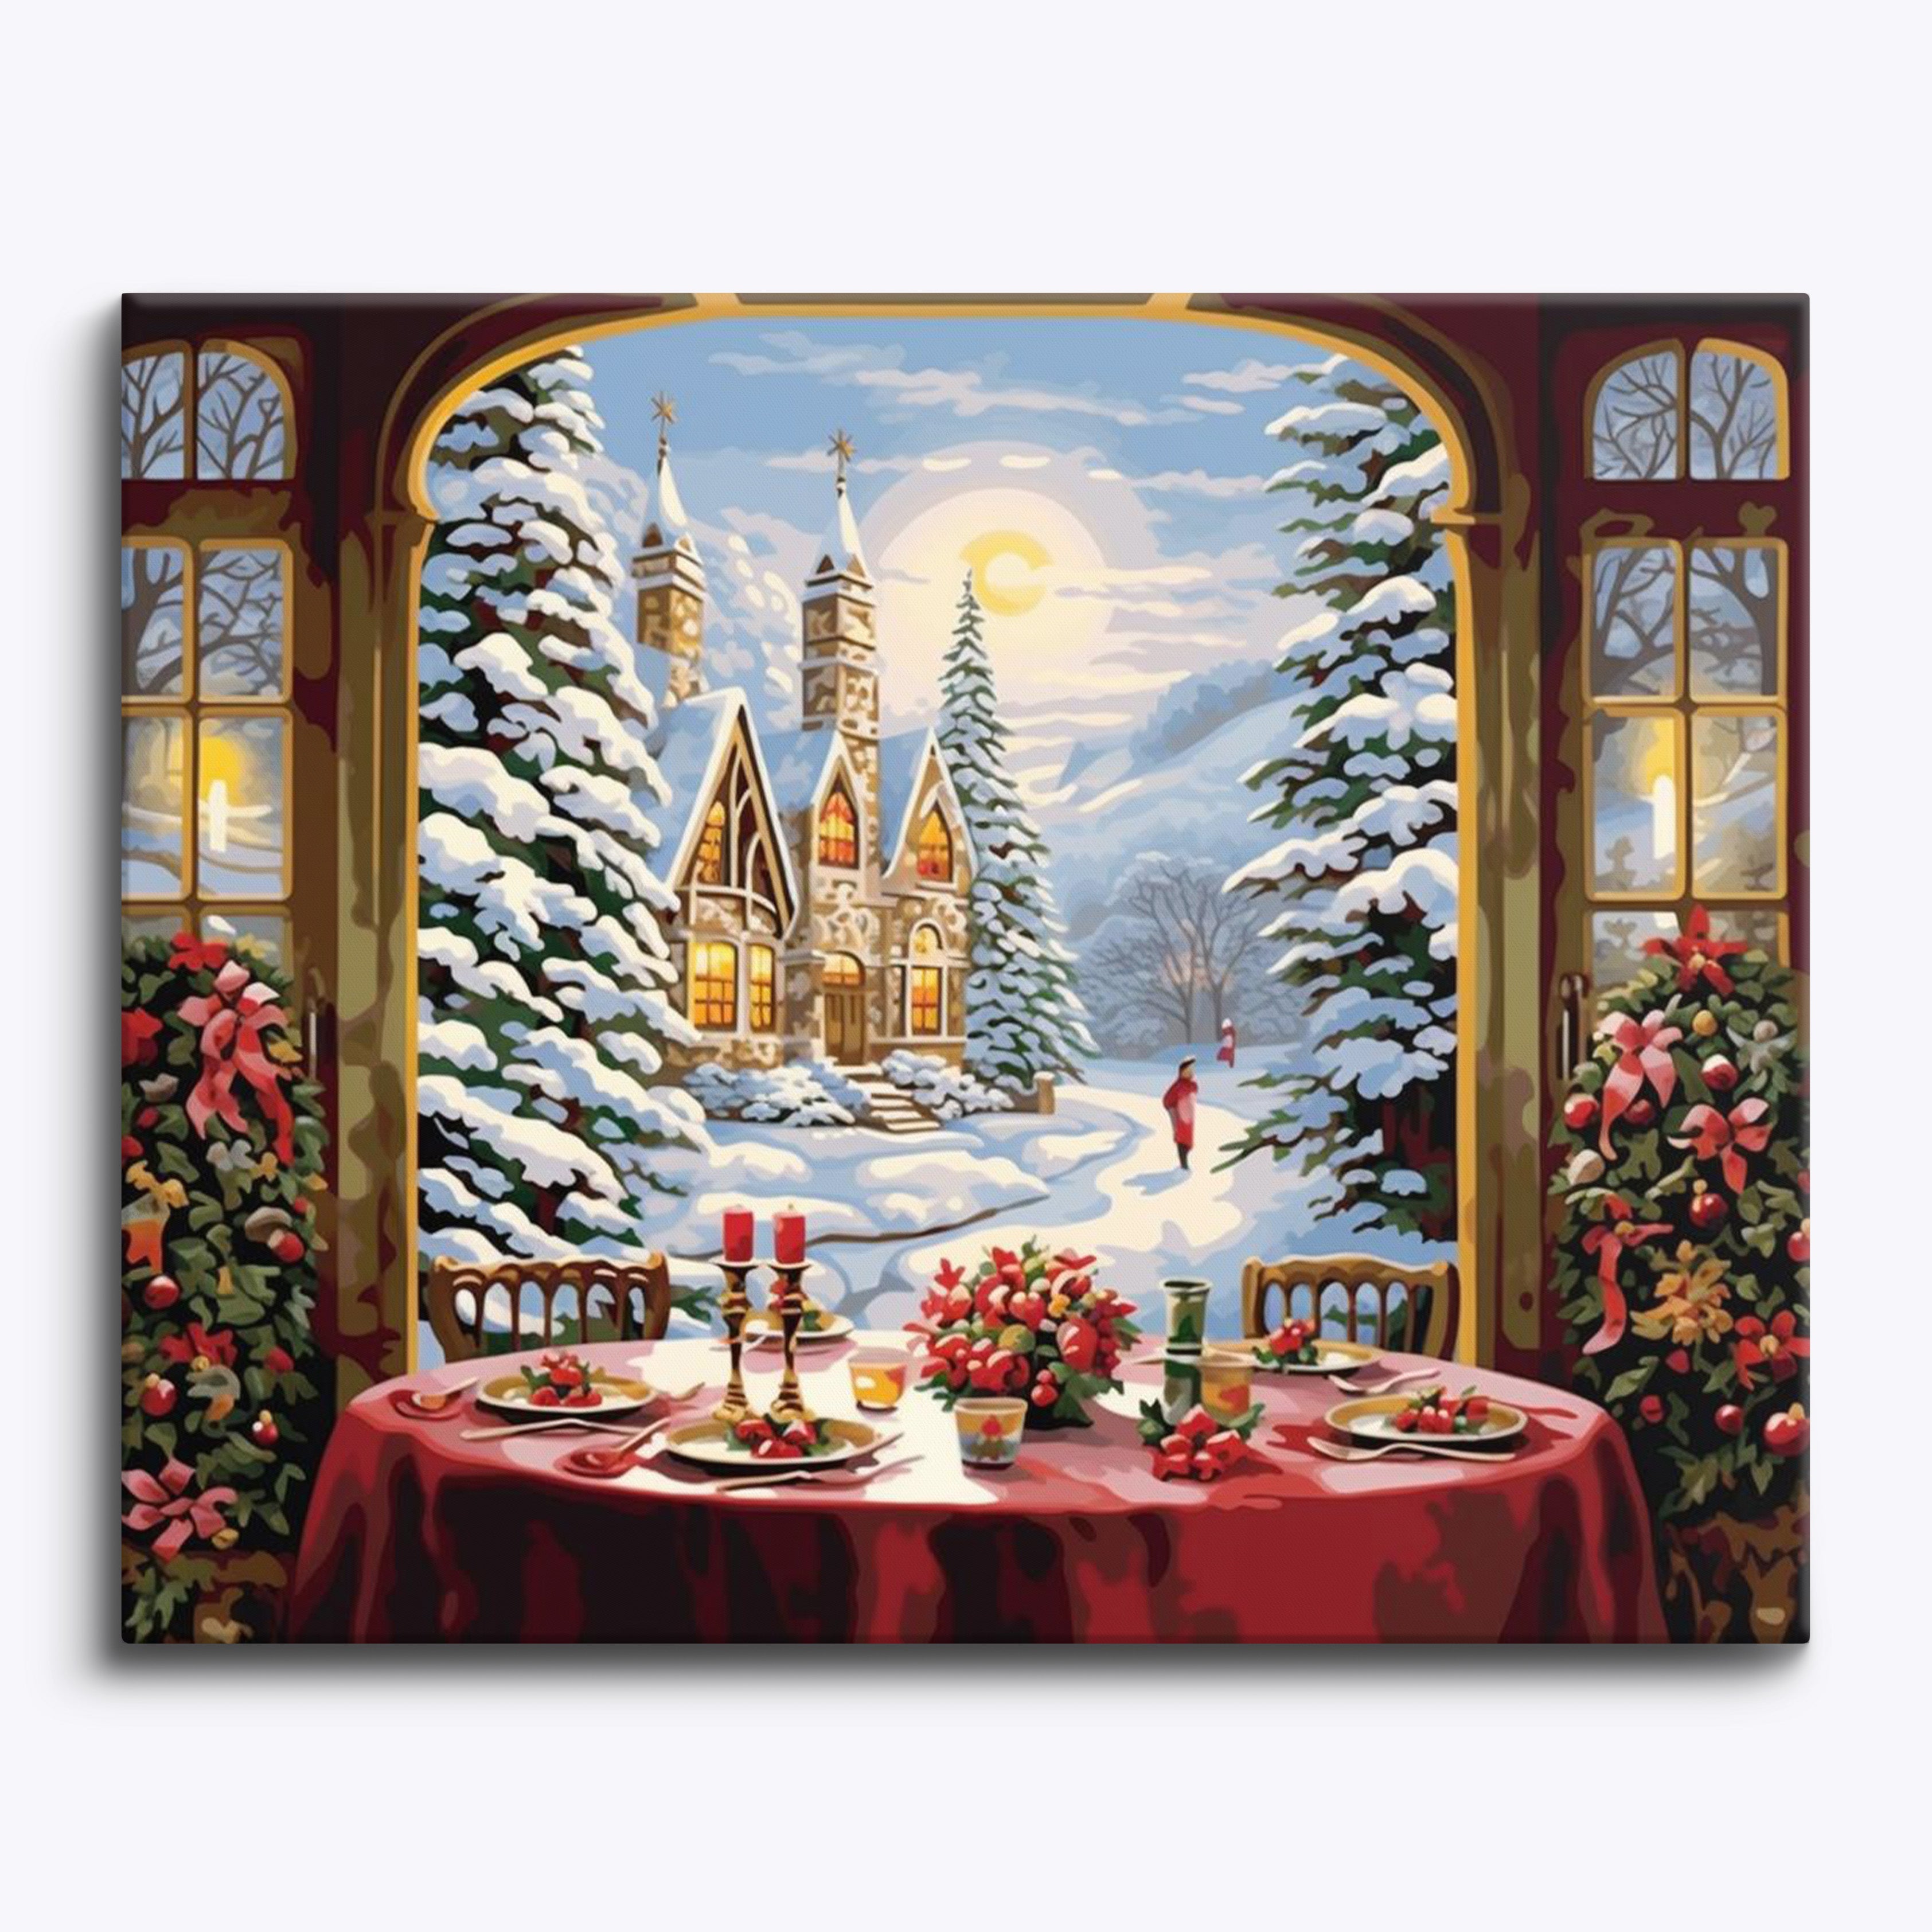 Christmas Window Candle Diamond Painting Kits, Fun DIY Interaction Craft  Digital Painting for Adults and Children, for Room Decor Bedroom Decor Or